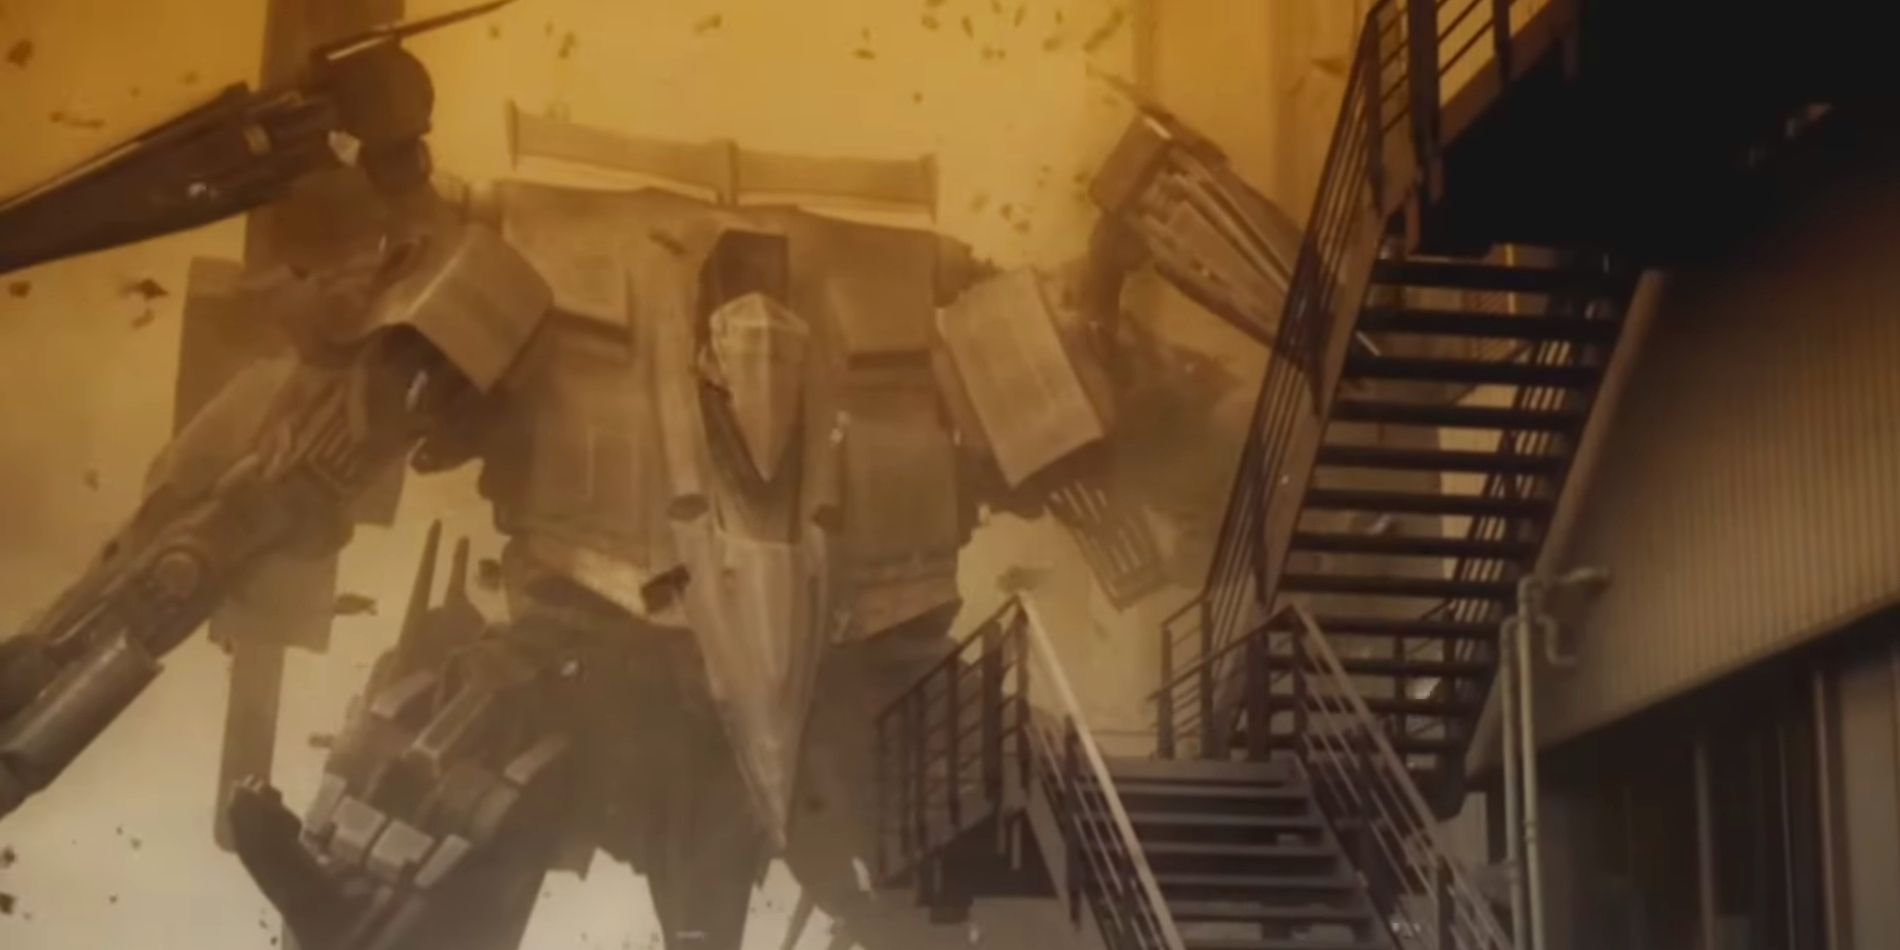 A large Armored Core mech is seen landing on a street with dust and debris cascading around it as it towers over the buildings fire escape.